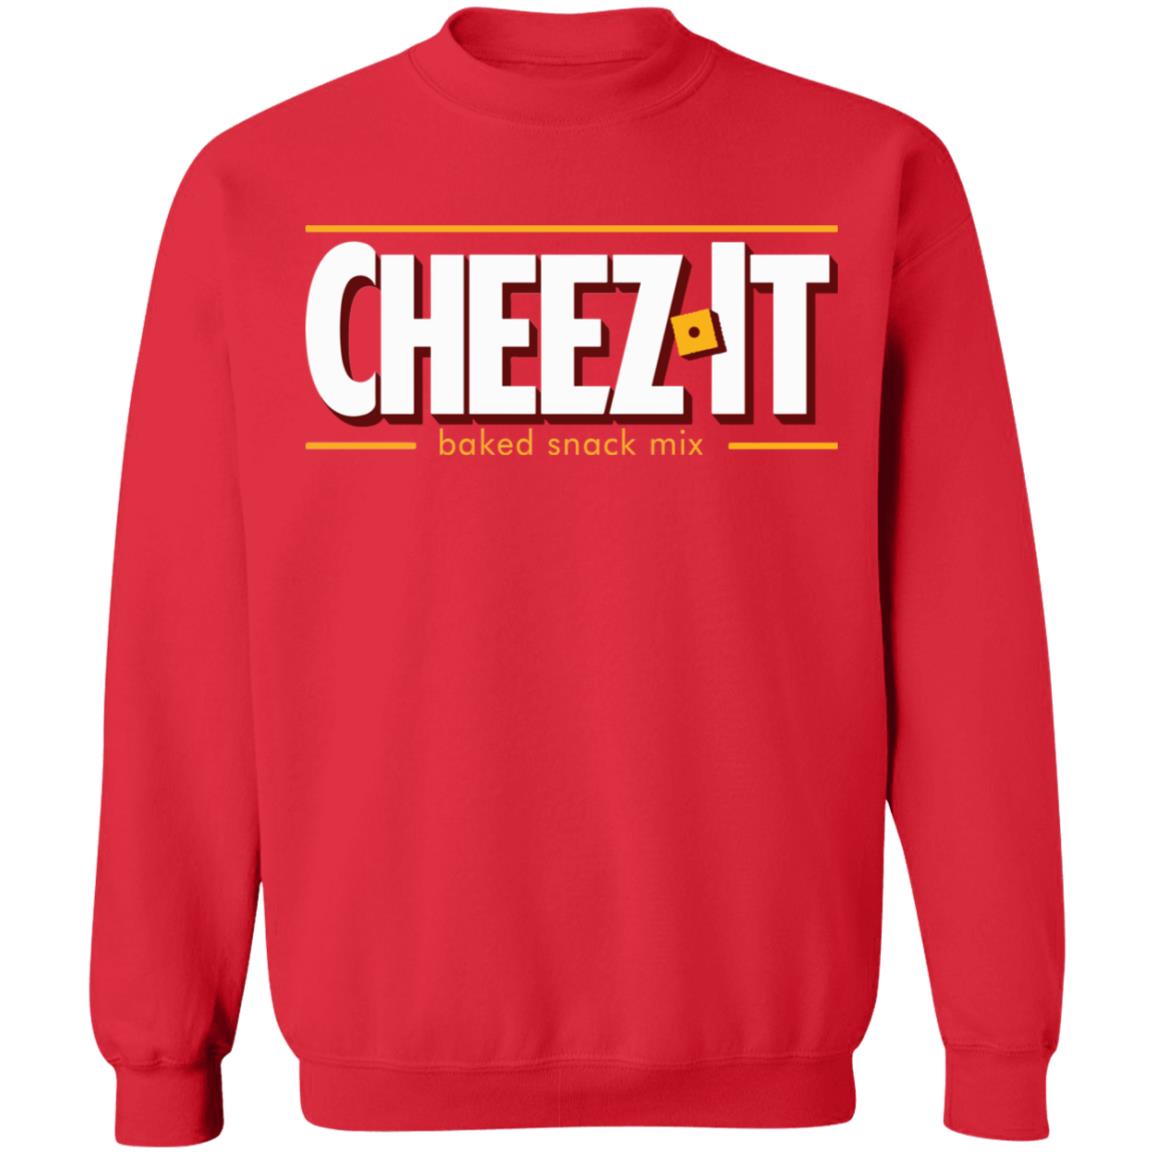 Cheez It Baked Snack Mix Shirt 12